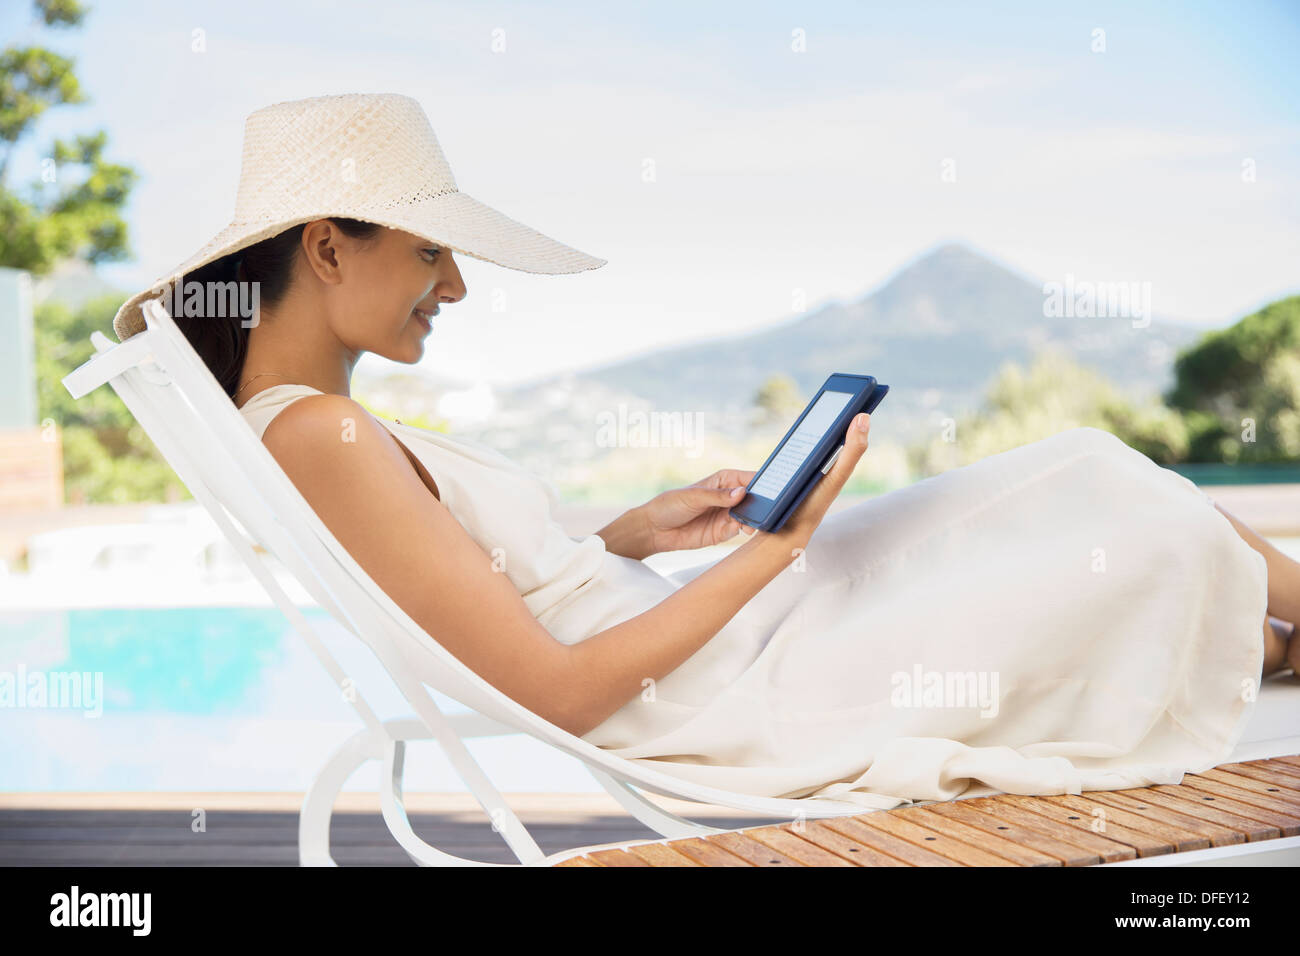 Woman Using Digital Tablet On Lounge Chair At Poolside Stock Photo